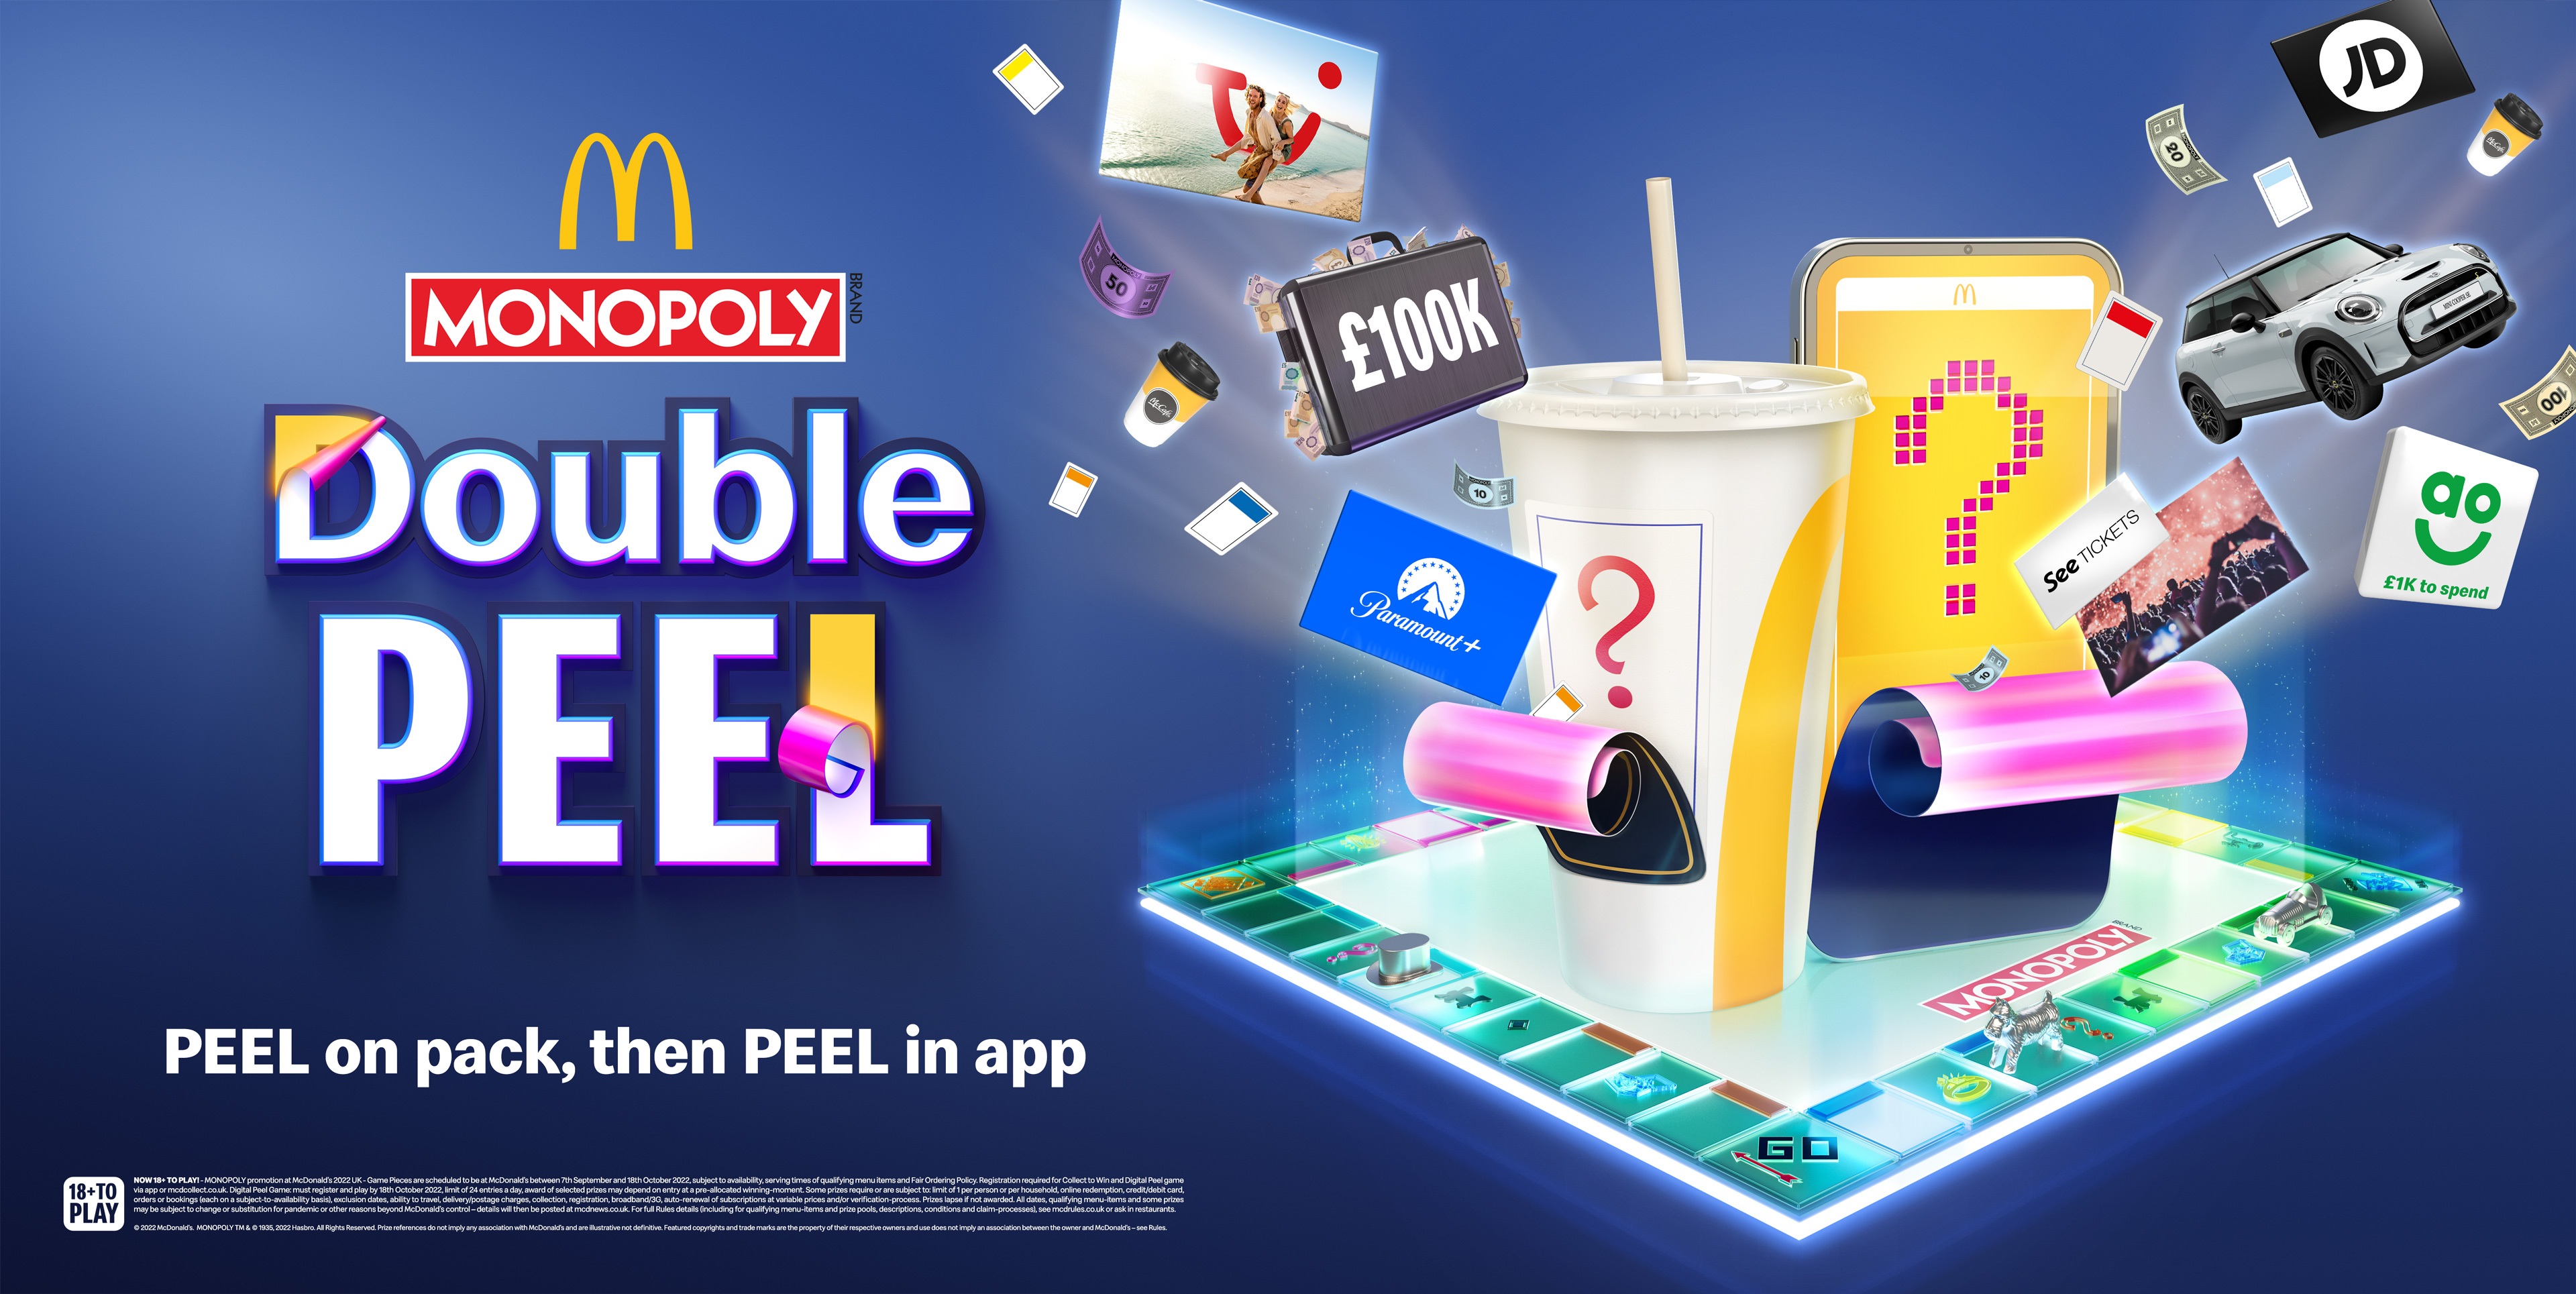 McDonalds takes its 2022 Monopoly promotion to the app Mobile